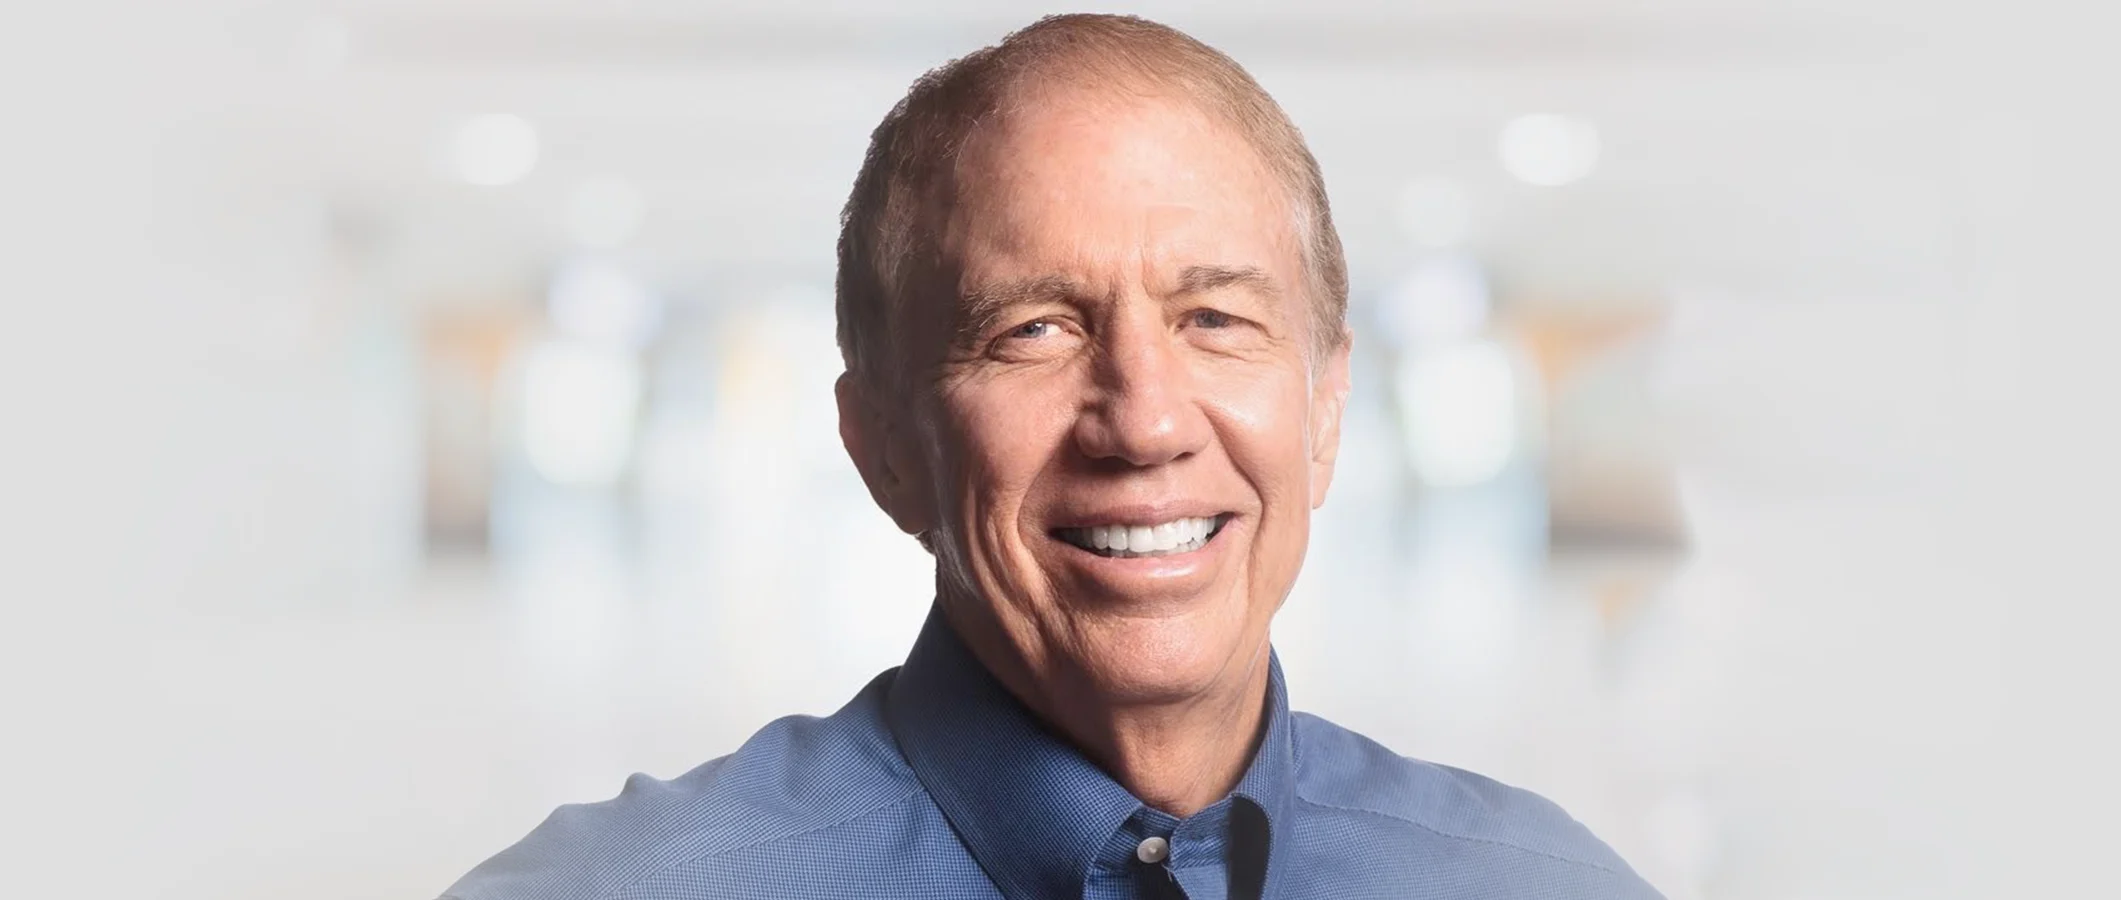 Podcast 137: World-Renowned Sports Psychologist Dr. Jim Loehr on Mental Performance